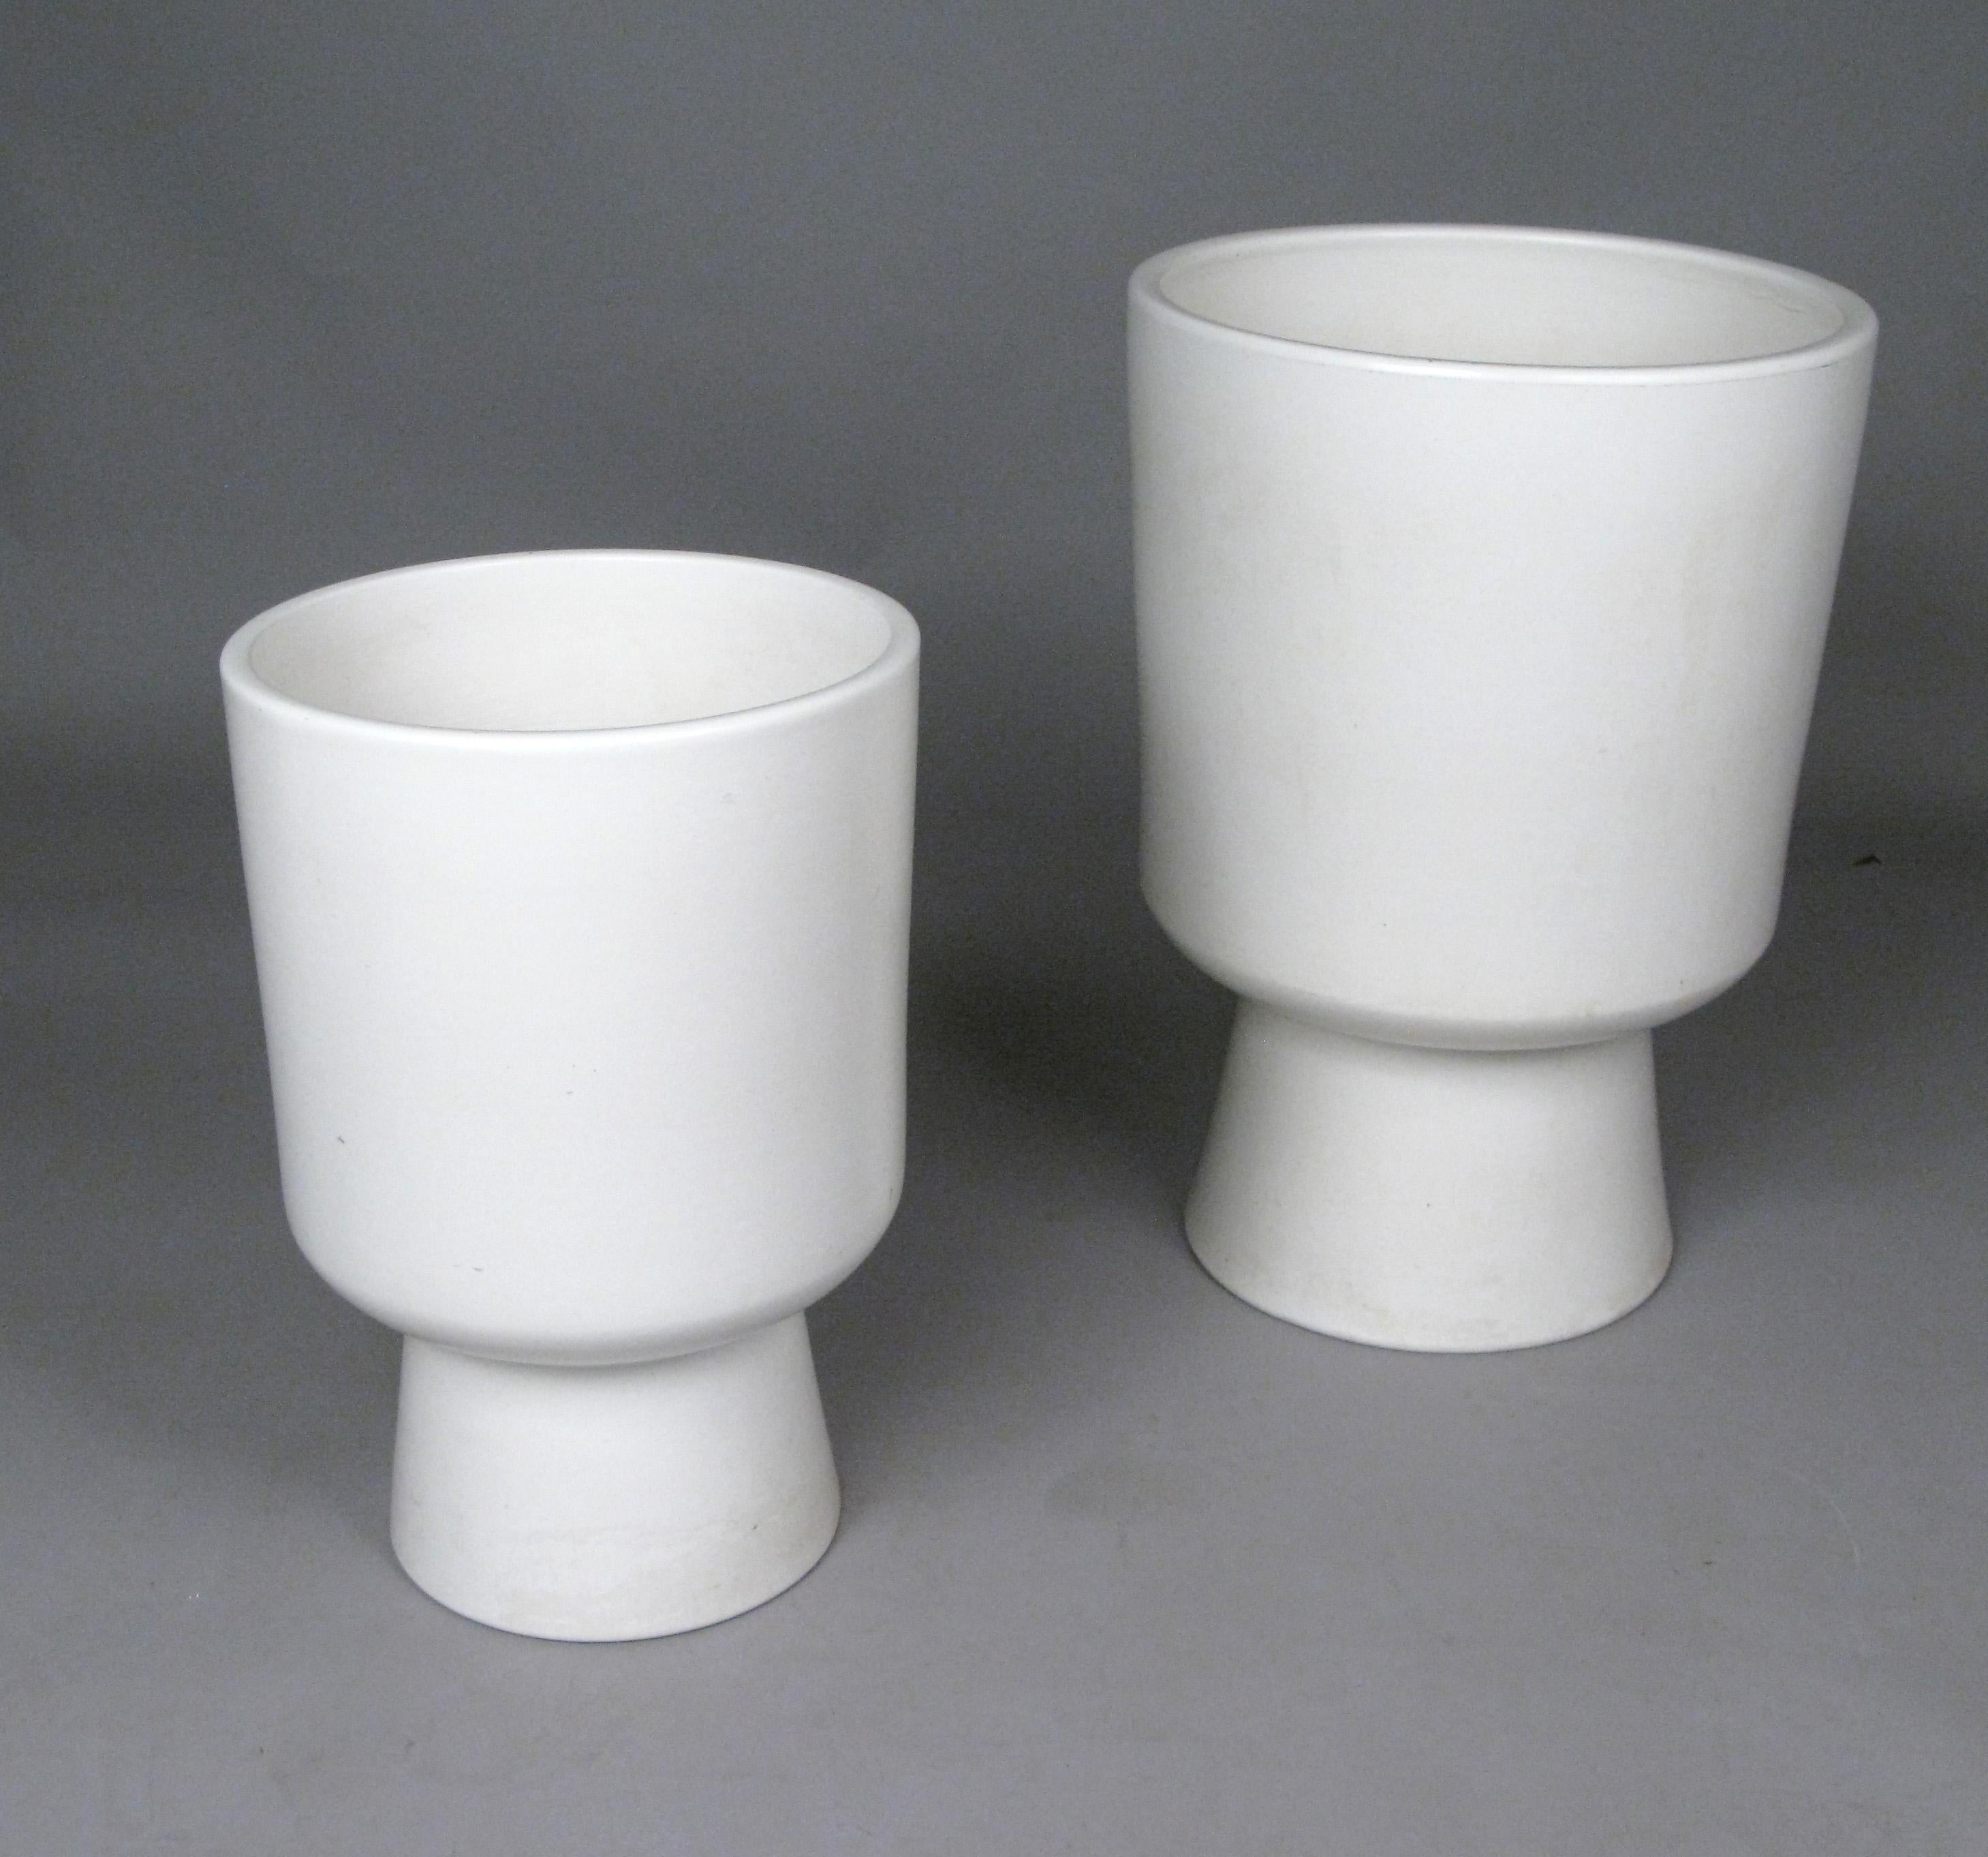 A beautiful companion pair of vintage 1960s 'Chalice' planters, one very large, and the other medium sized, designed by Malcolm Leland for Architectural Pottery. Both in matte white glaze ceramic, these are the most classic of Leland's designs. The